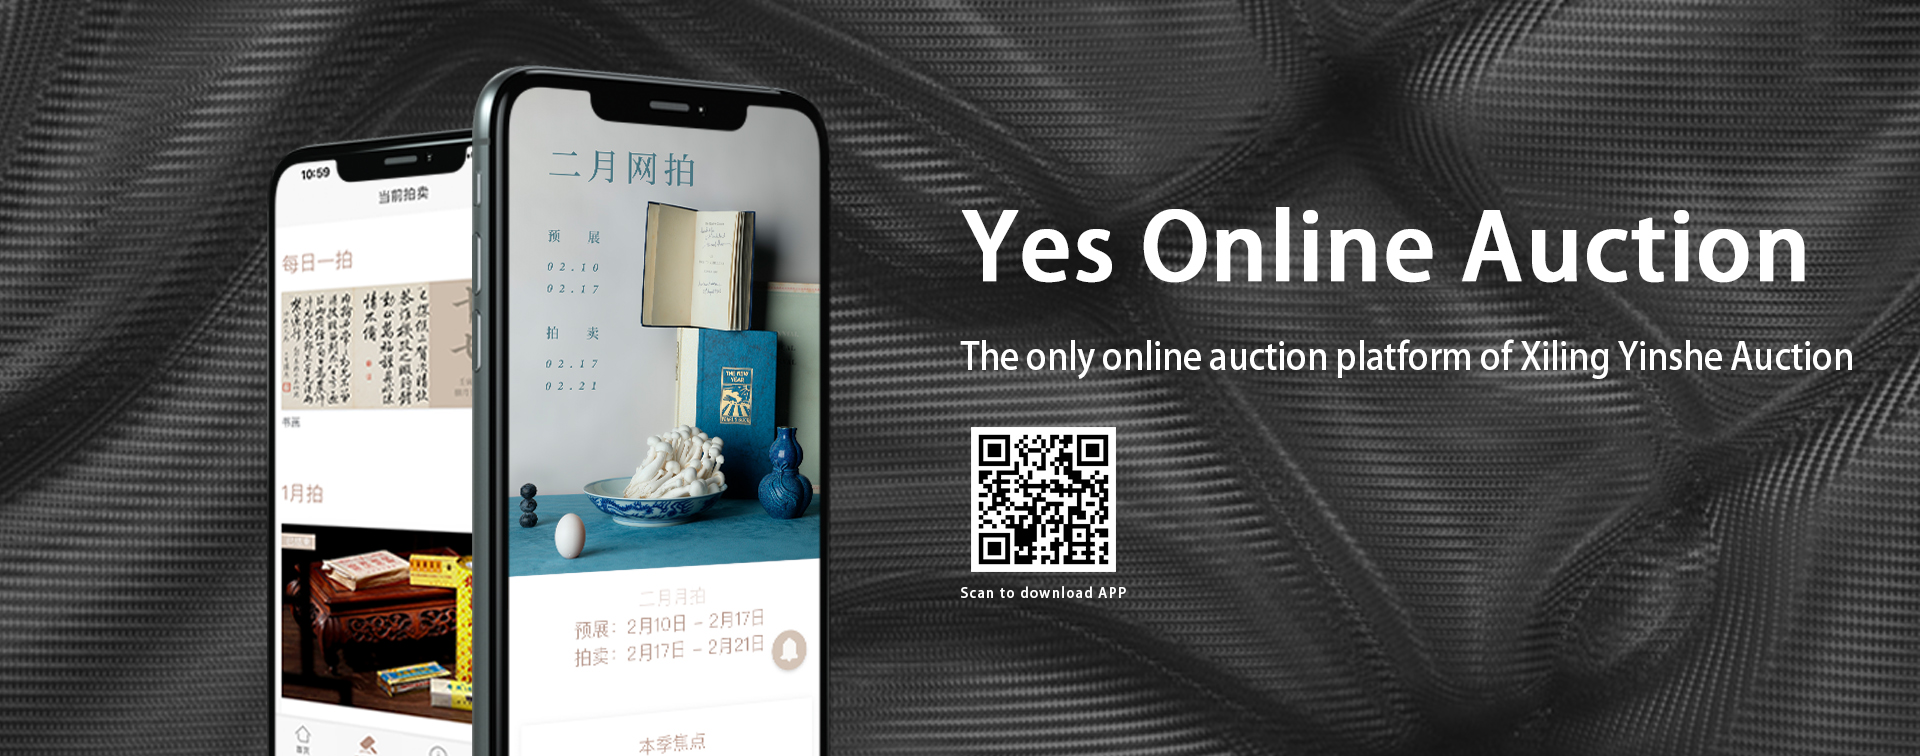 Xiling Online Auction